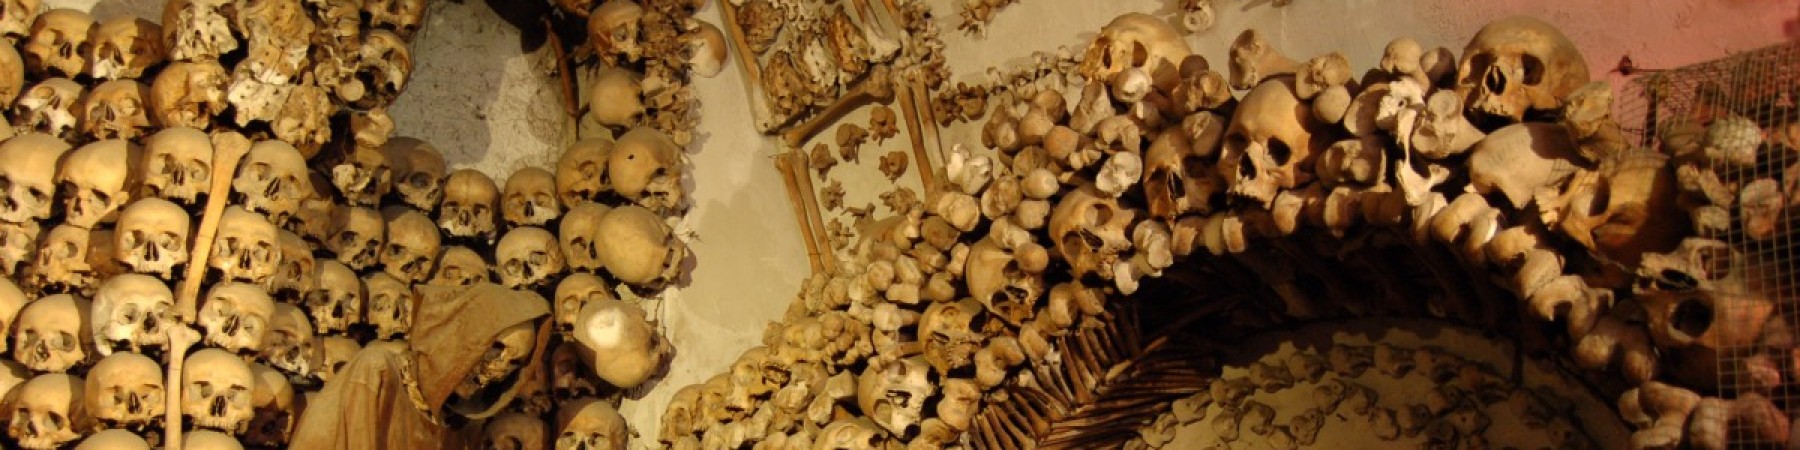  Platinum Card - The Capuchin Crypt and the Christian Catacombs